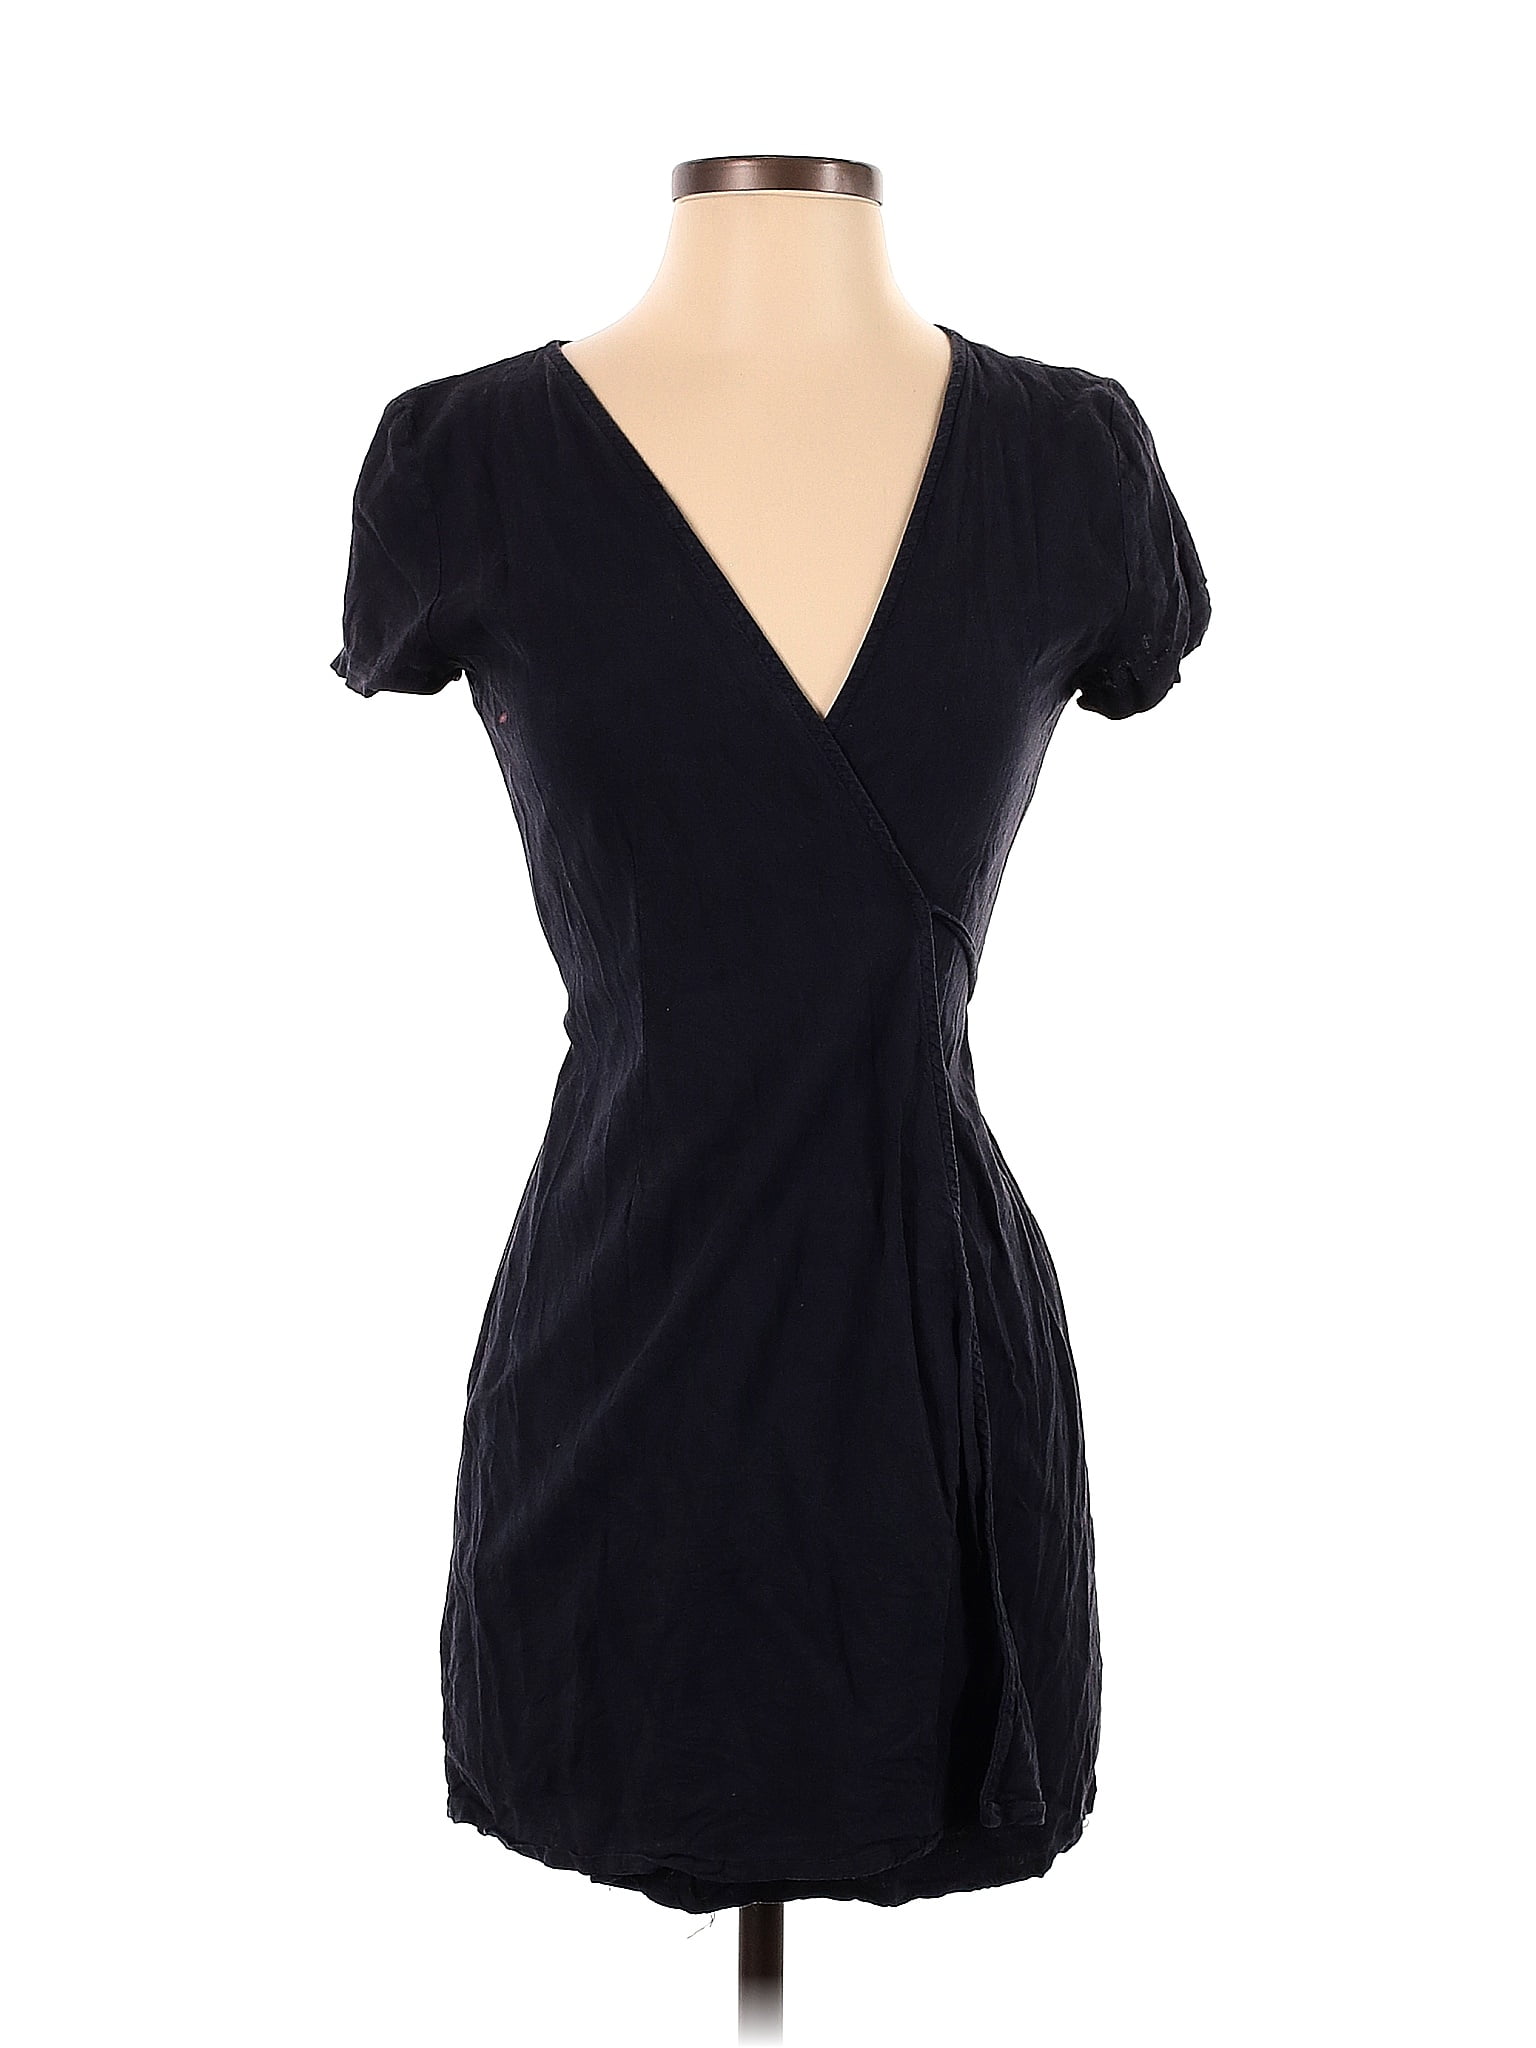 Brandy Melville 100% Cotton Solid Black Casual Dress Size Sm (Estimated) -  60% off